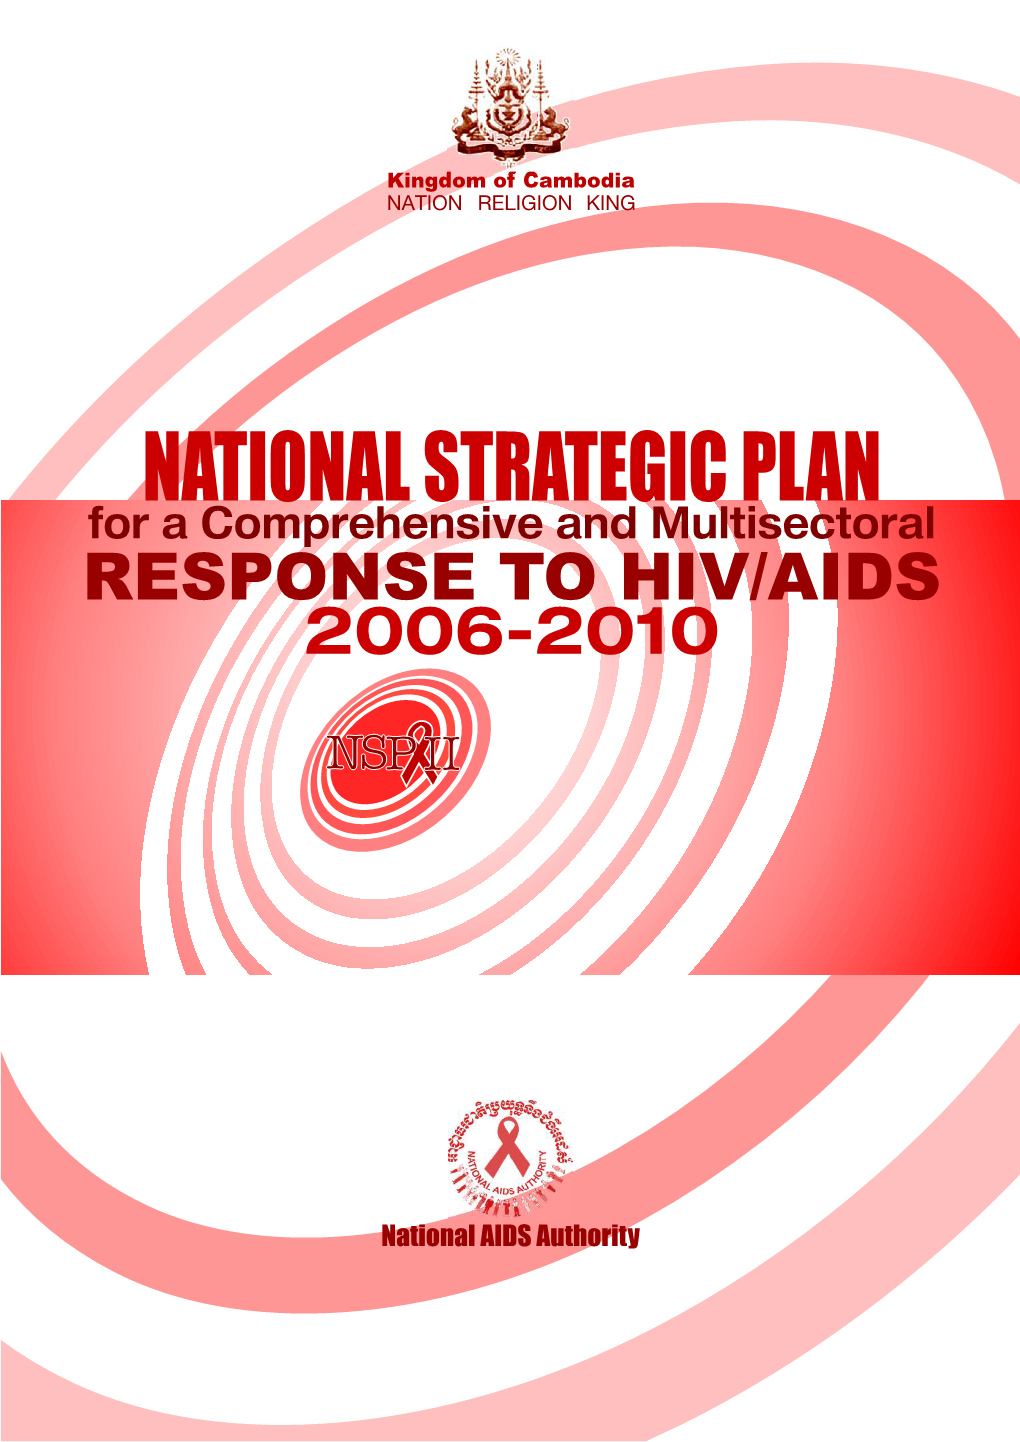 NATIONAL STRATEGIC PLAN for a Comprehensive and Multisectoral RESPONSE to HIV/AIDS 2006-2010